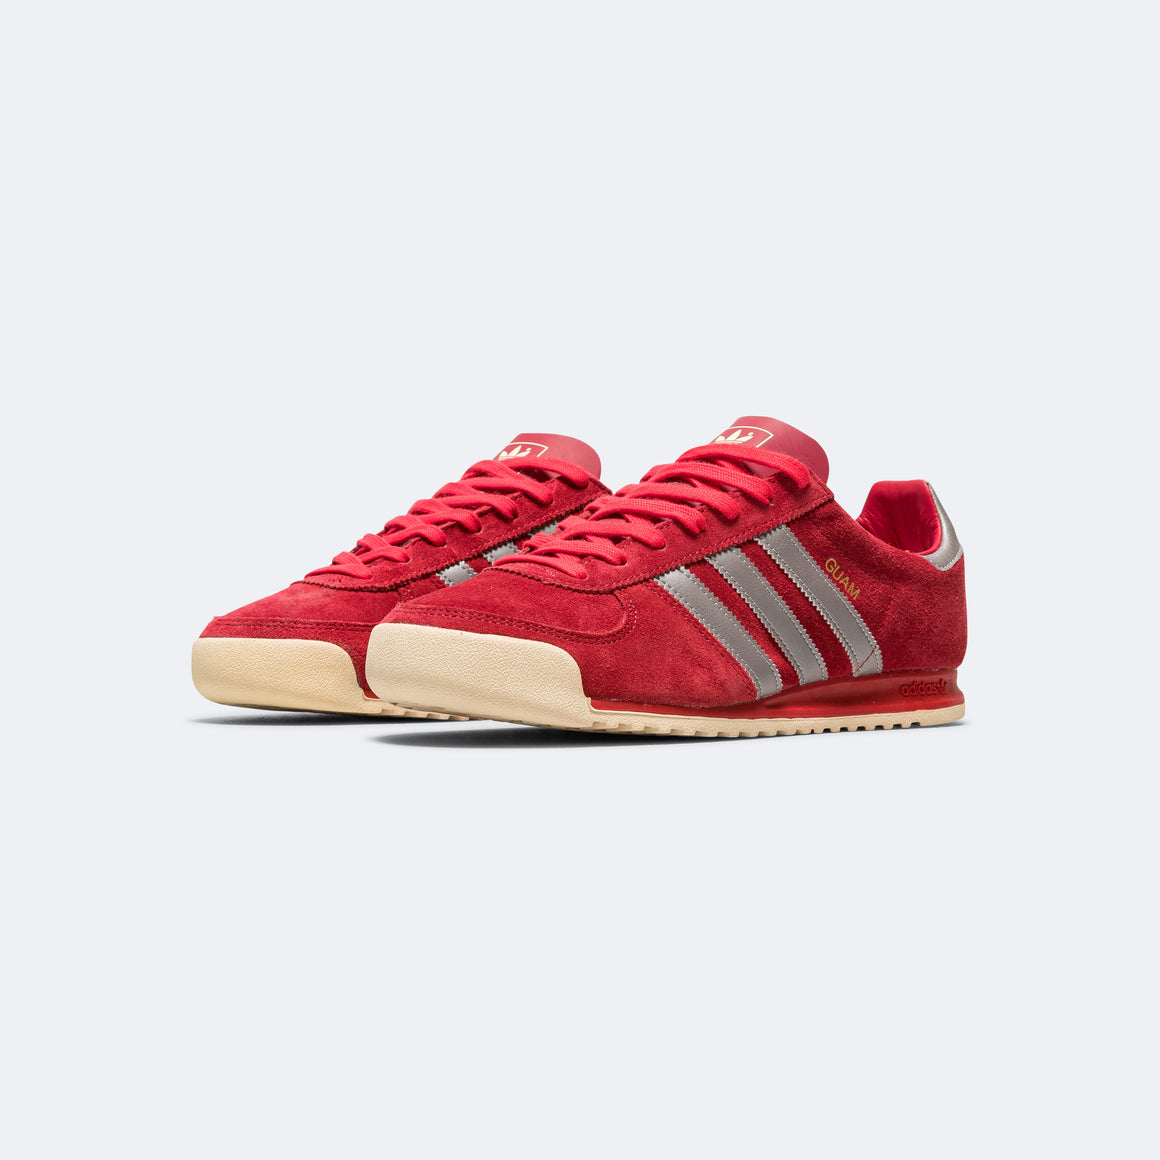 adidas - Guam - Active Maroon/Tech Silver Metallic-Better Scarlet - UP THERE